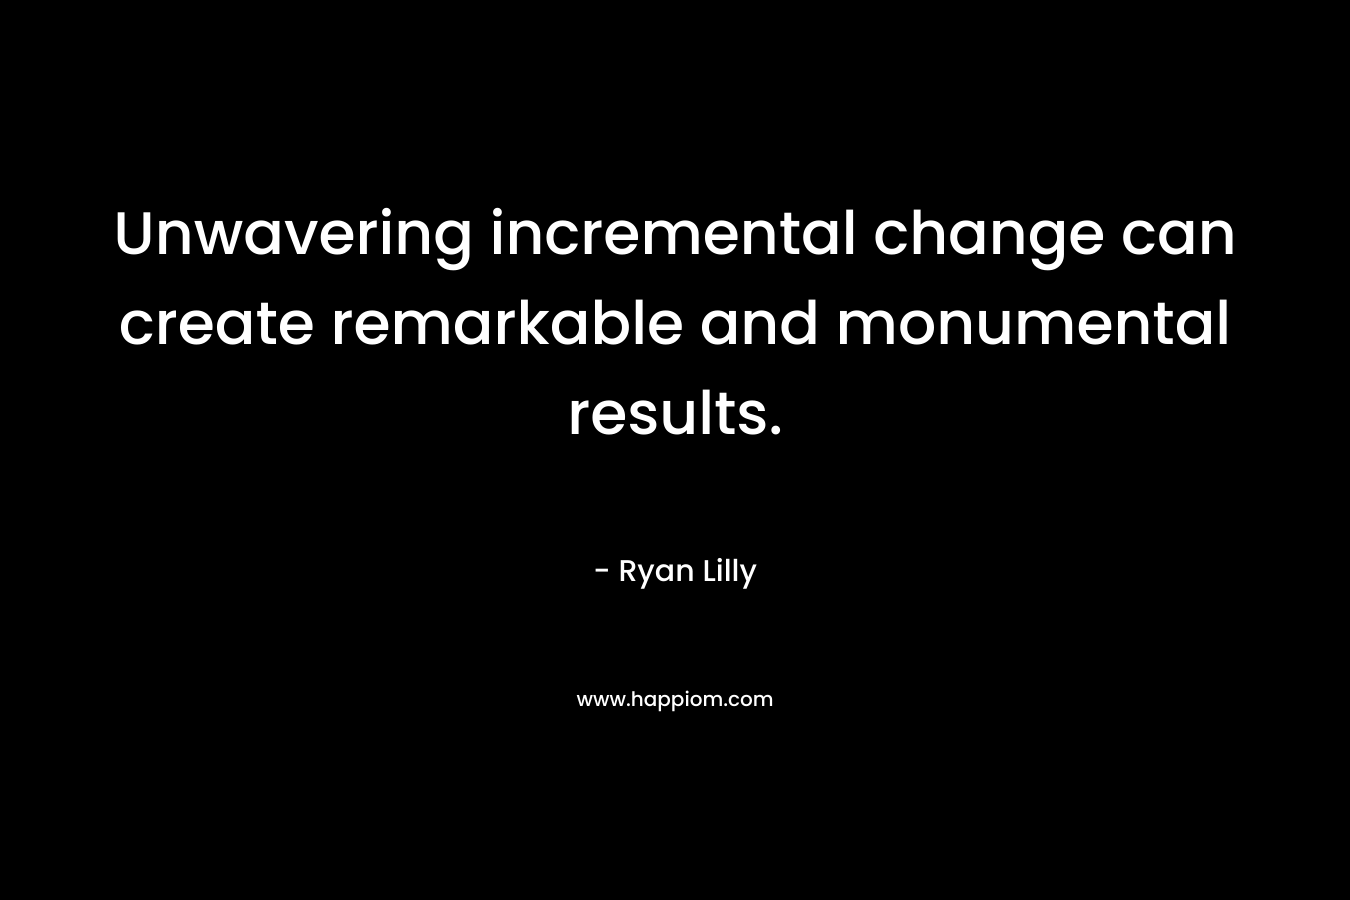 Unwavering incremental change can create remarkable and monumental results.